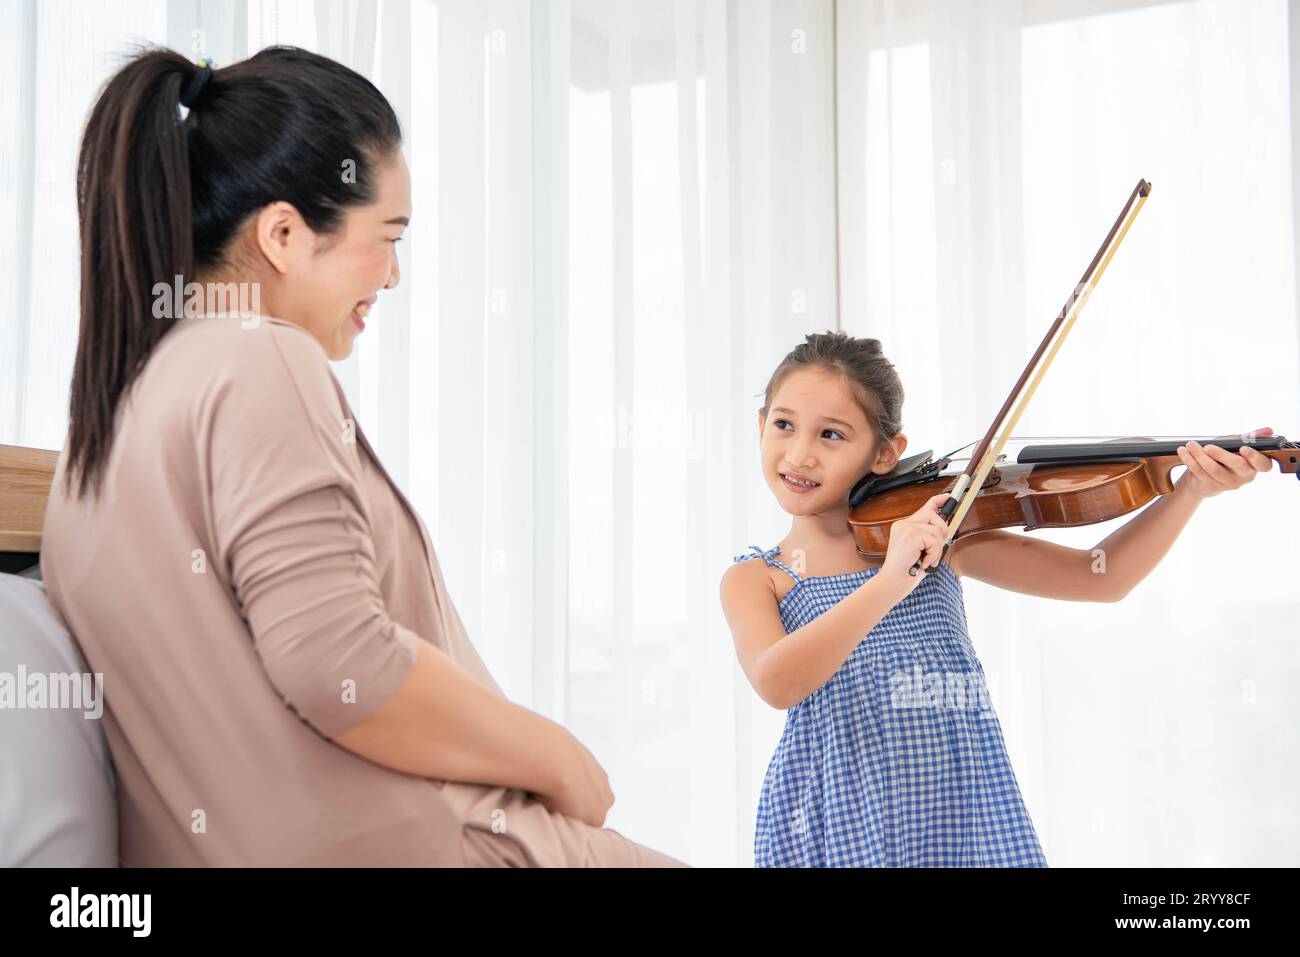 Girl playing violin with her pregnant mother for lullaby newborn in mother belly. Musical and entertainment concept. Stock Photo